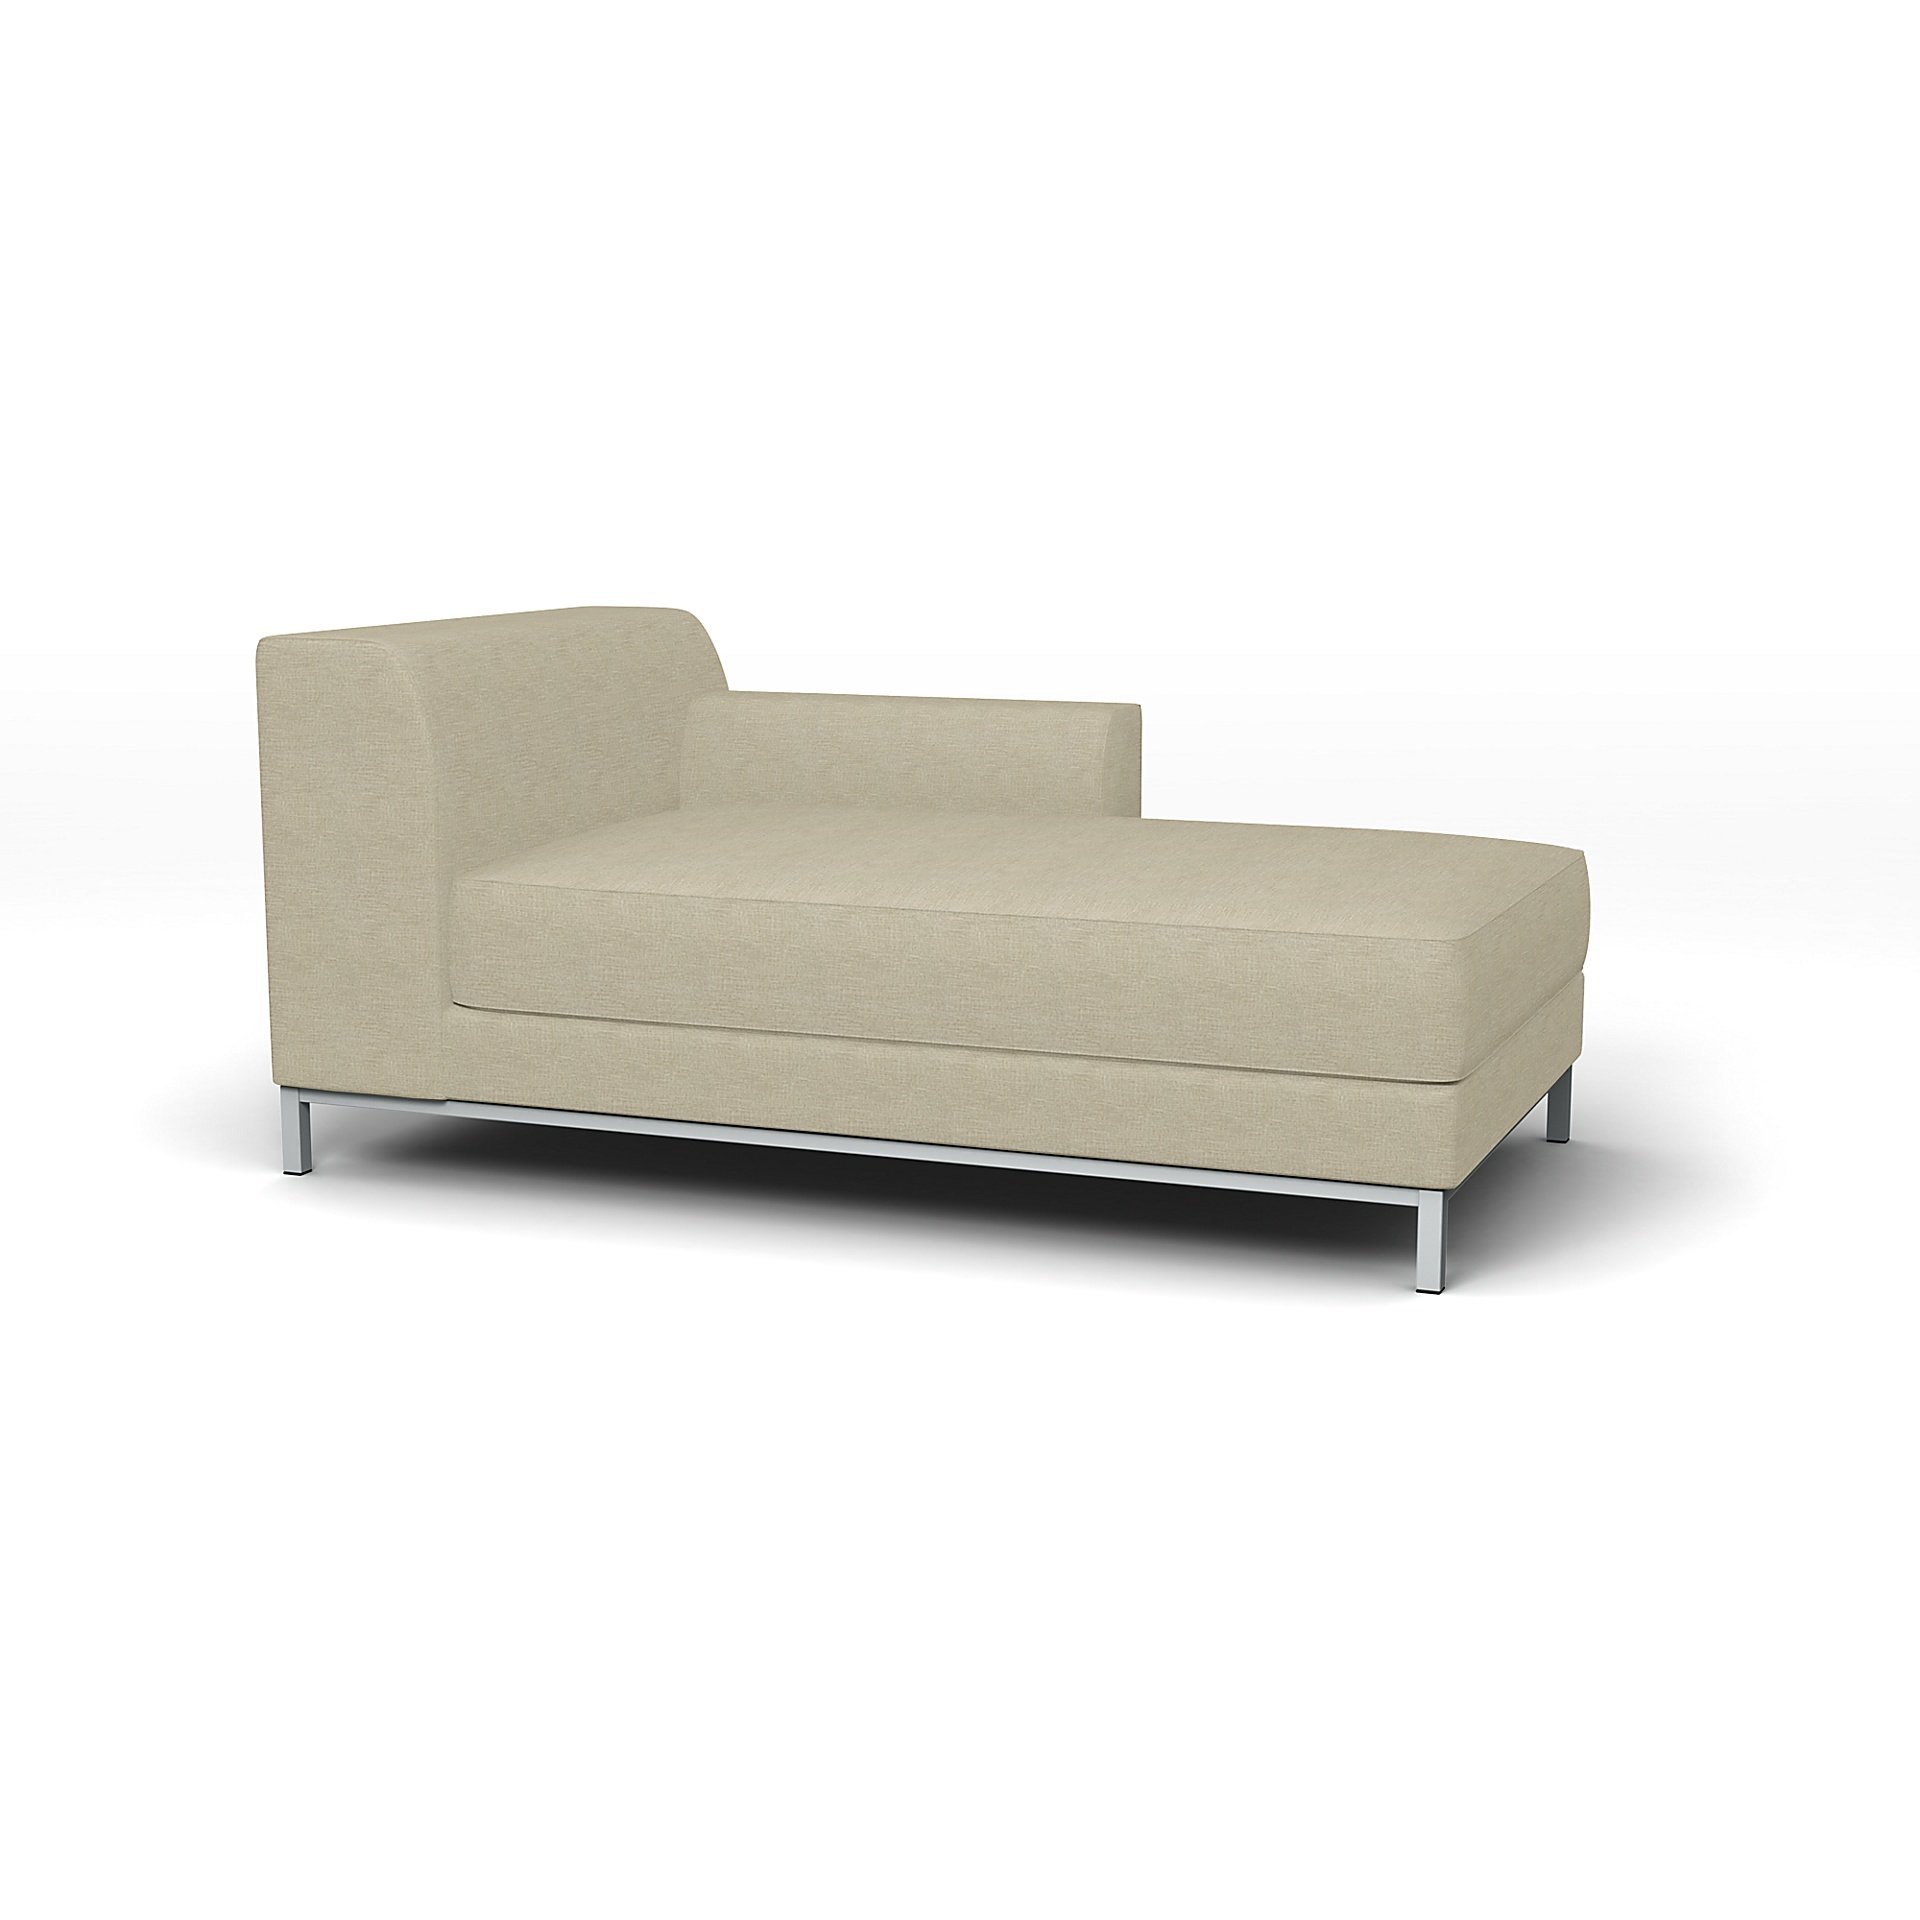 IKEA - Kramfors Chaise Longue with Right Arm Cover, Soft White, Moody Seventies Collection - Bemz